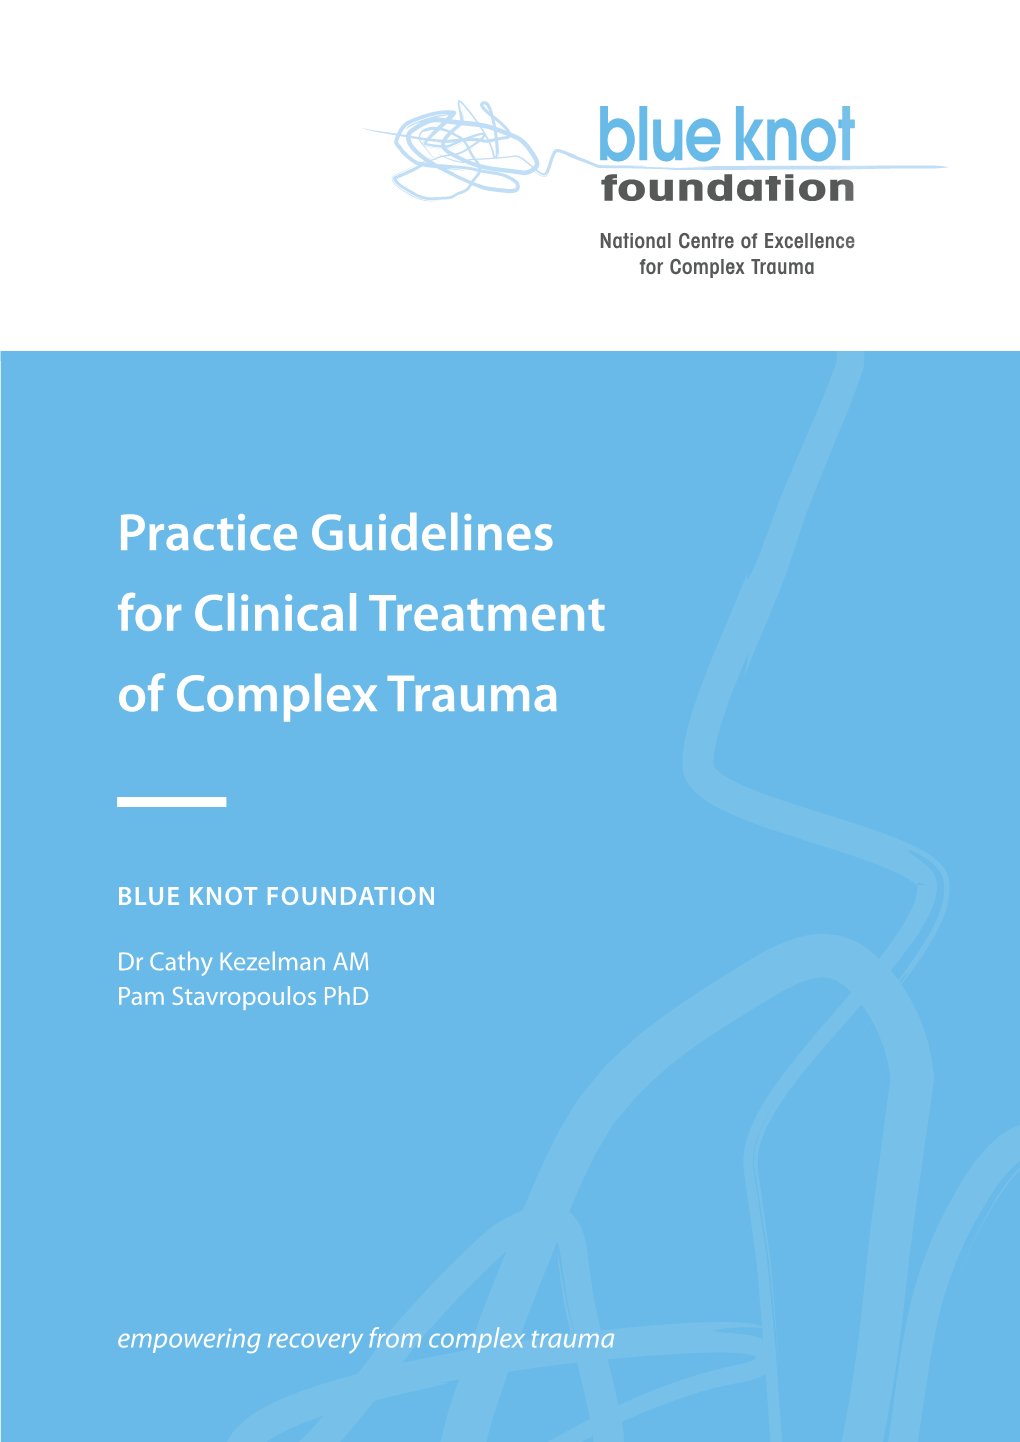 Practice Guidelines for Clinical Treatment of Complex Trauma BLUE KNOT FOUNDATION